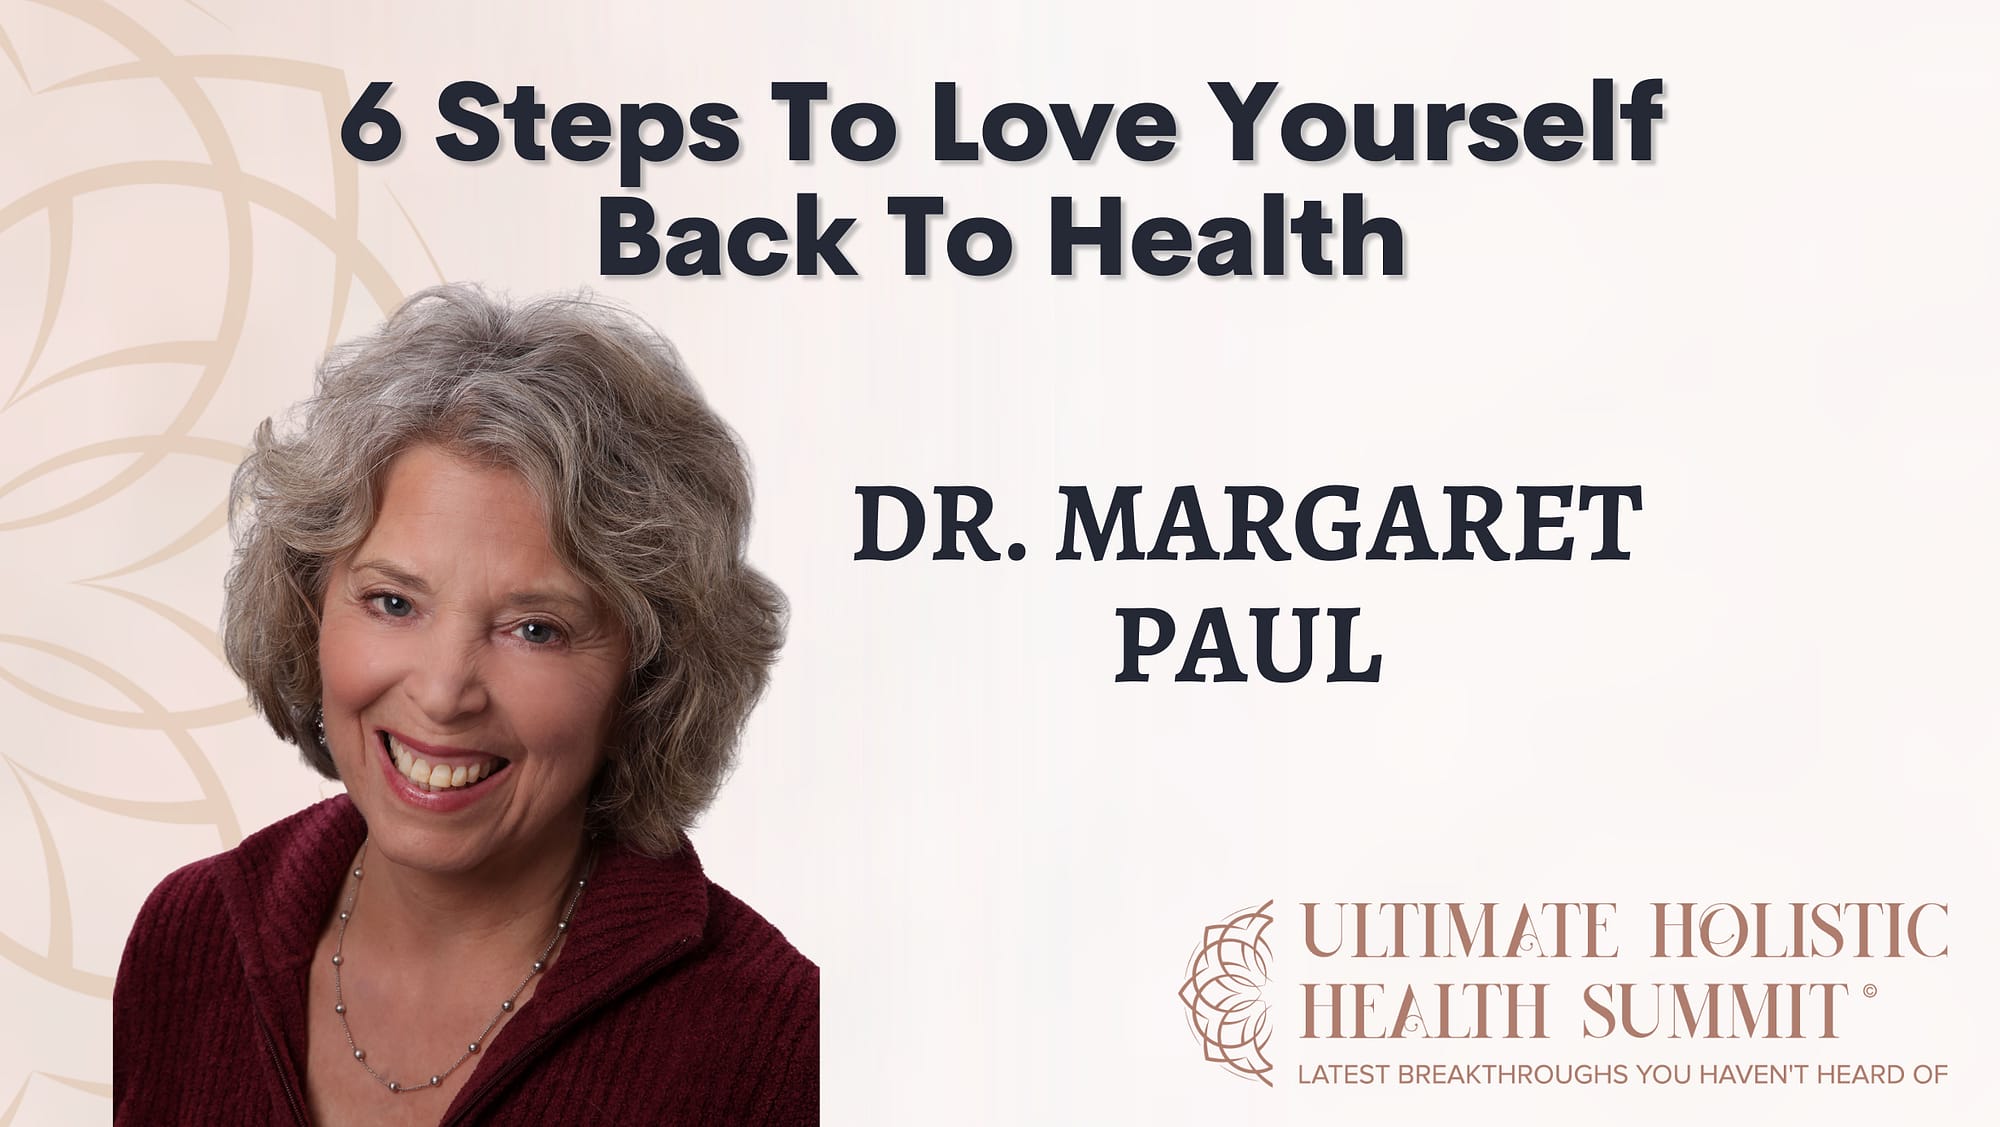 6 Steps To Love Yourself Back To Health